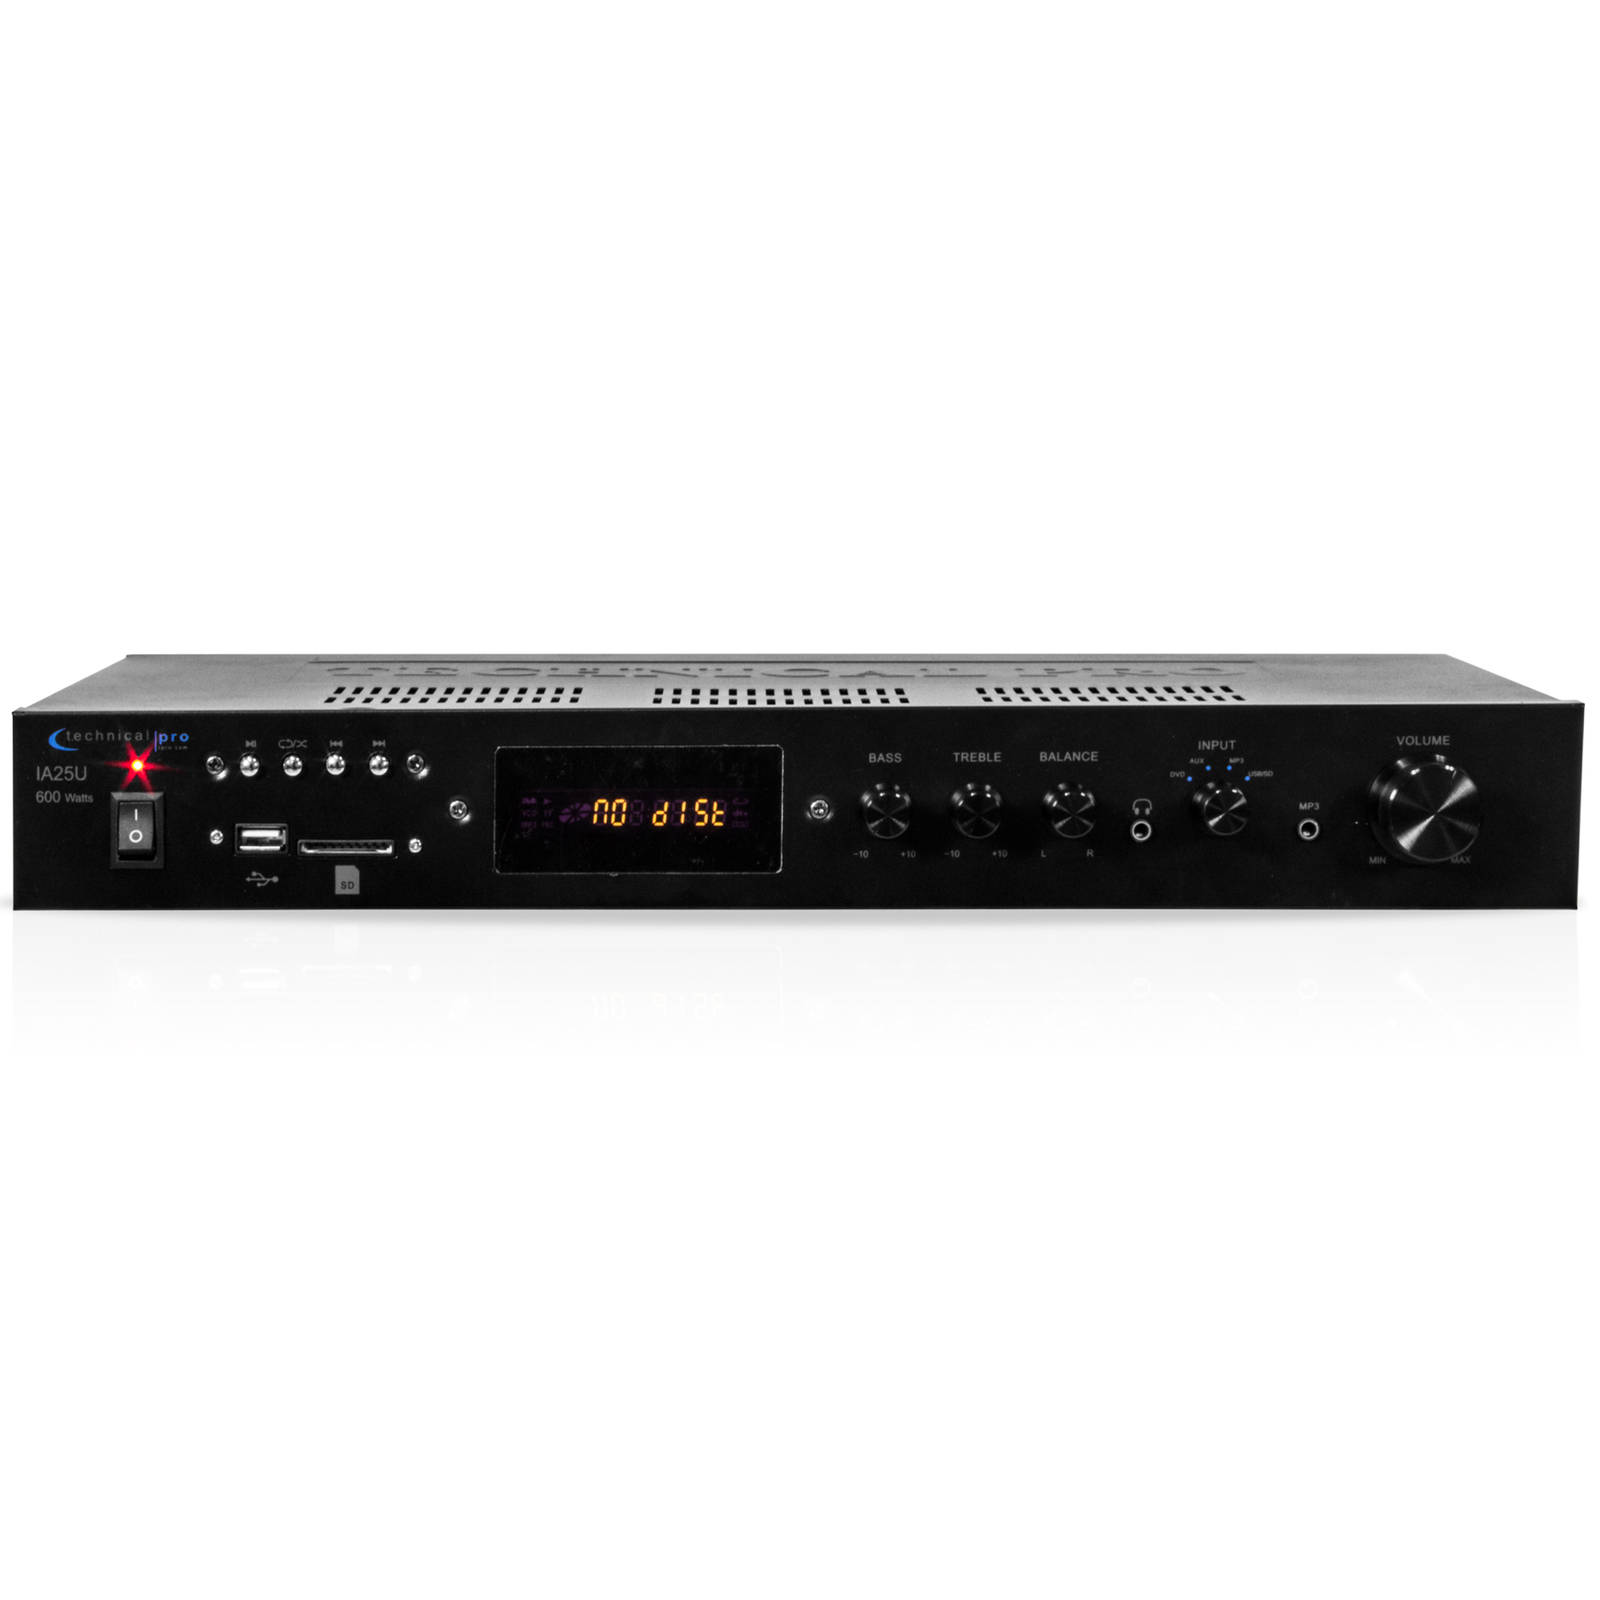 Technical Pro 600W Integrated Amplifier w/ USB & SD Card Inputs, Plays MP3 Files - $69.99